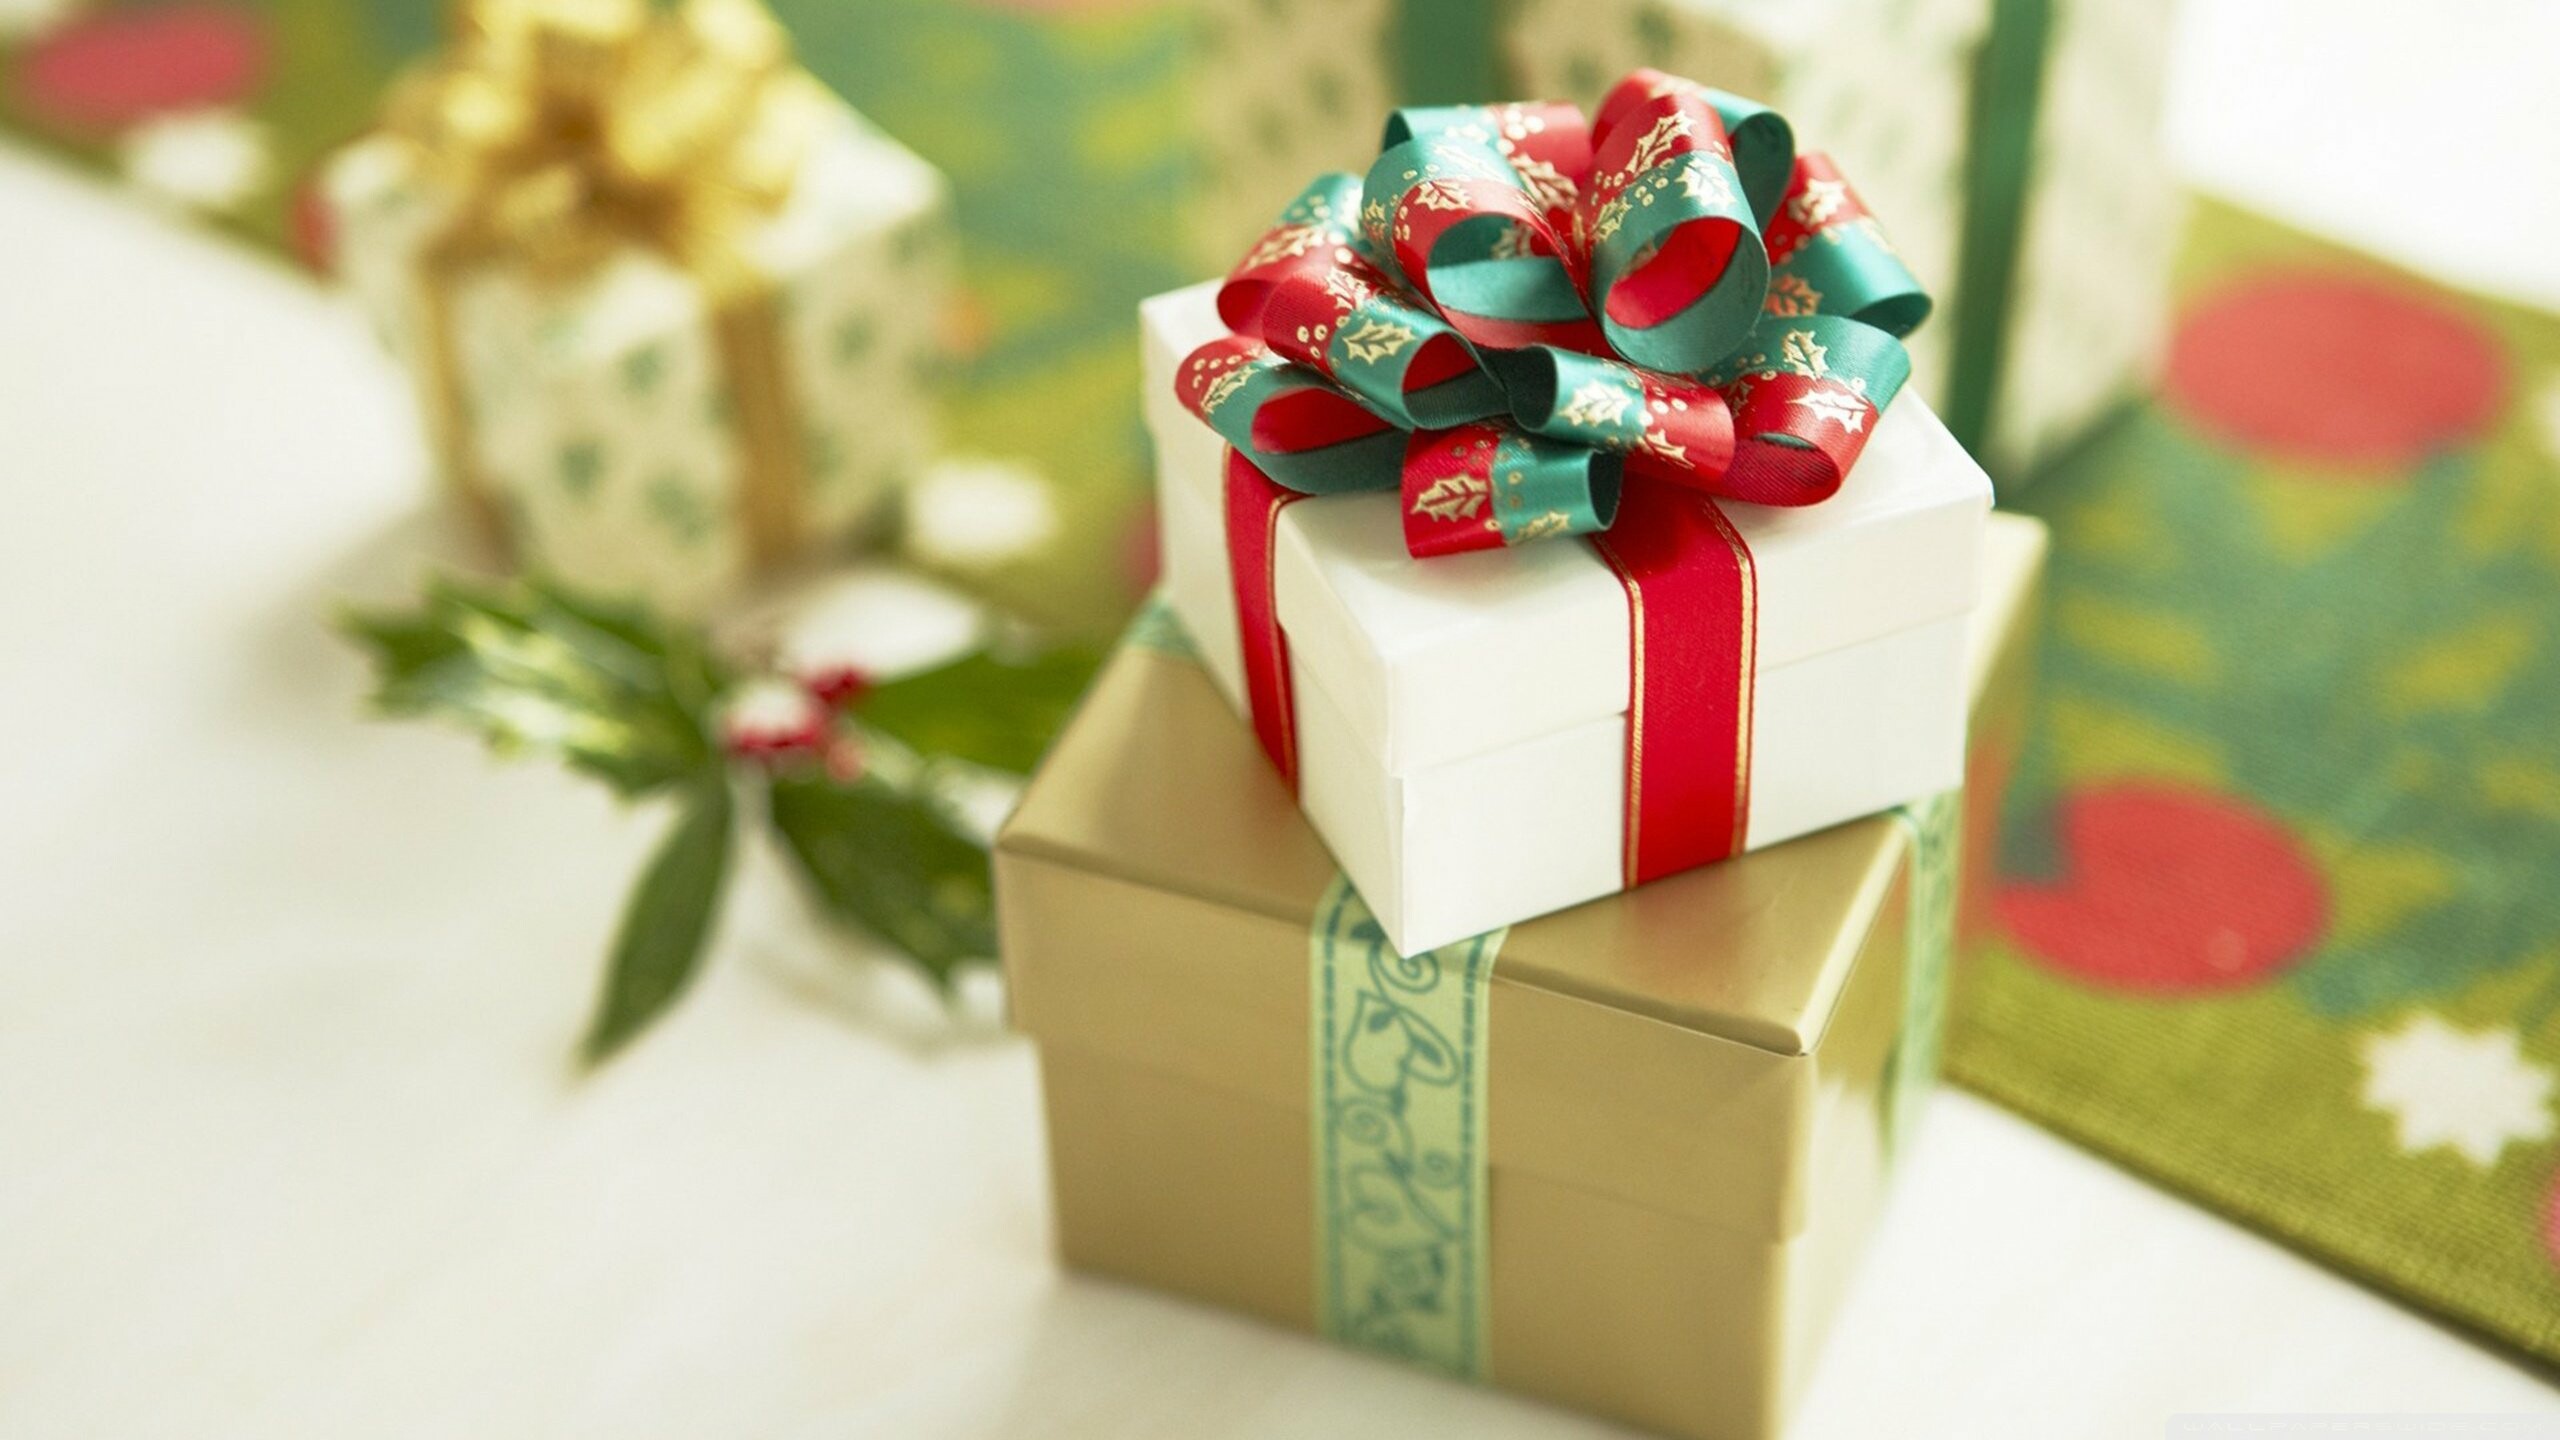 Christmas Gifts: The big or small boxes wrapped brightly with a bow and name tag. 2560x1440 HD Background.